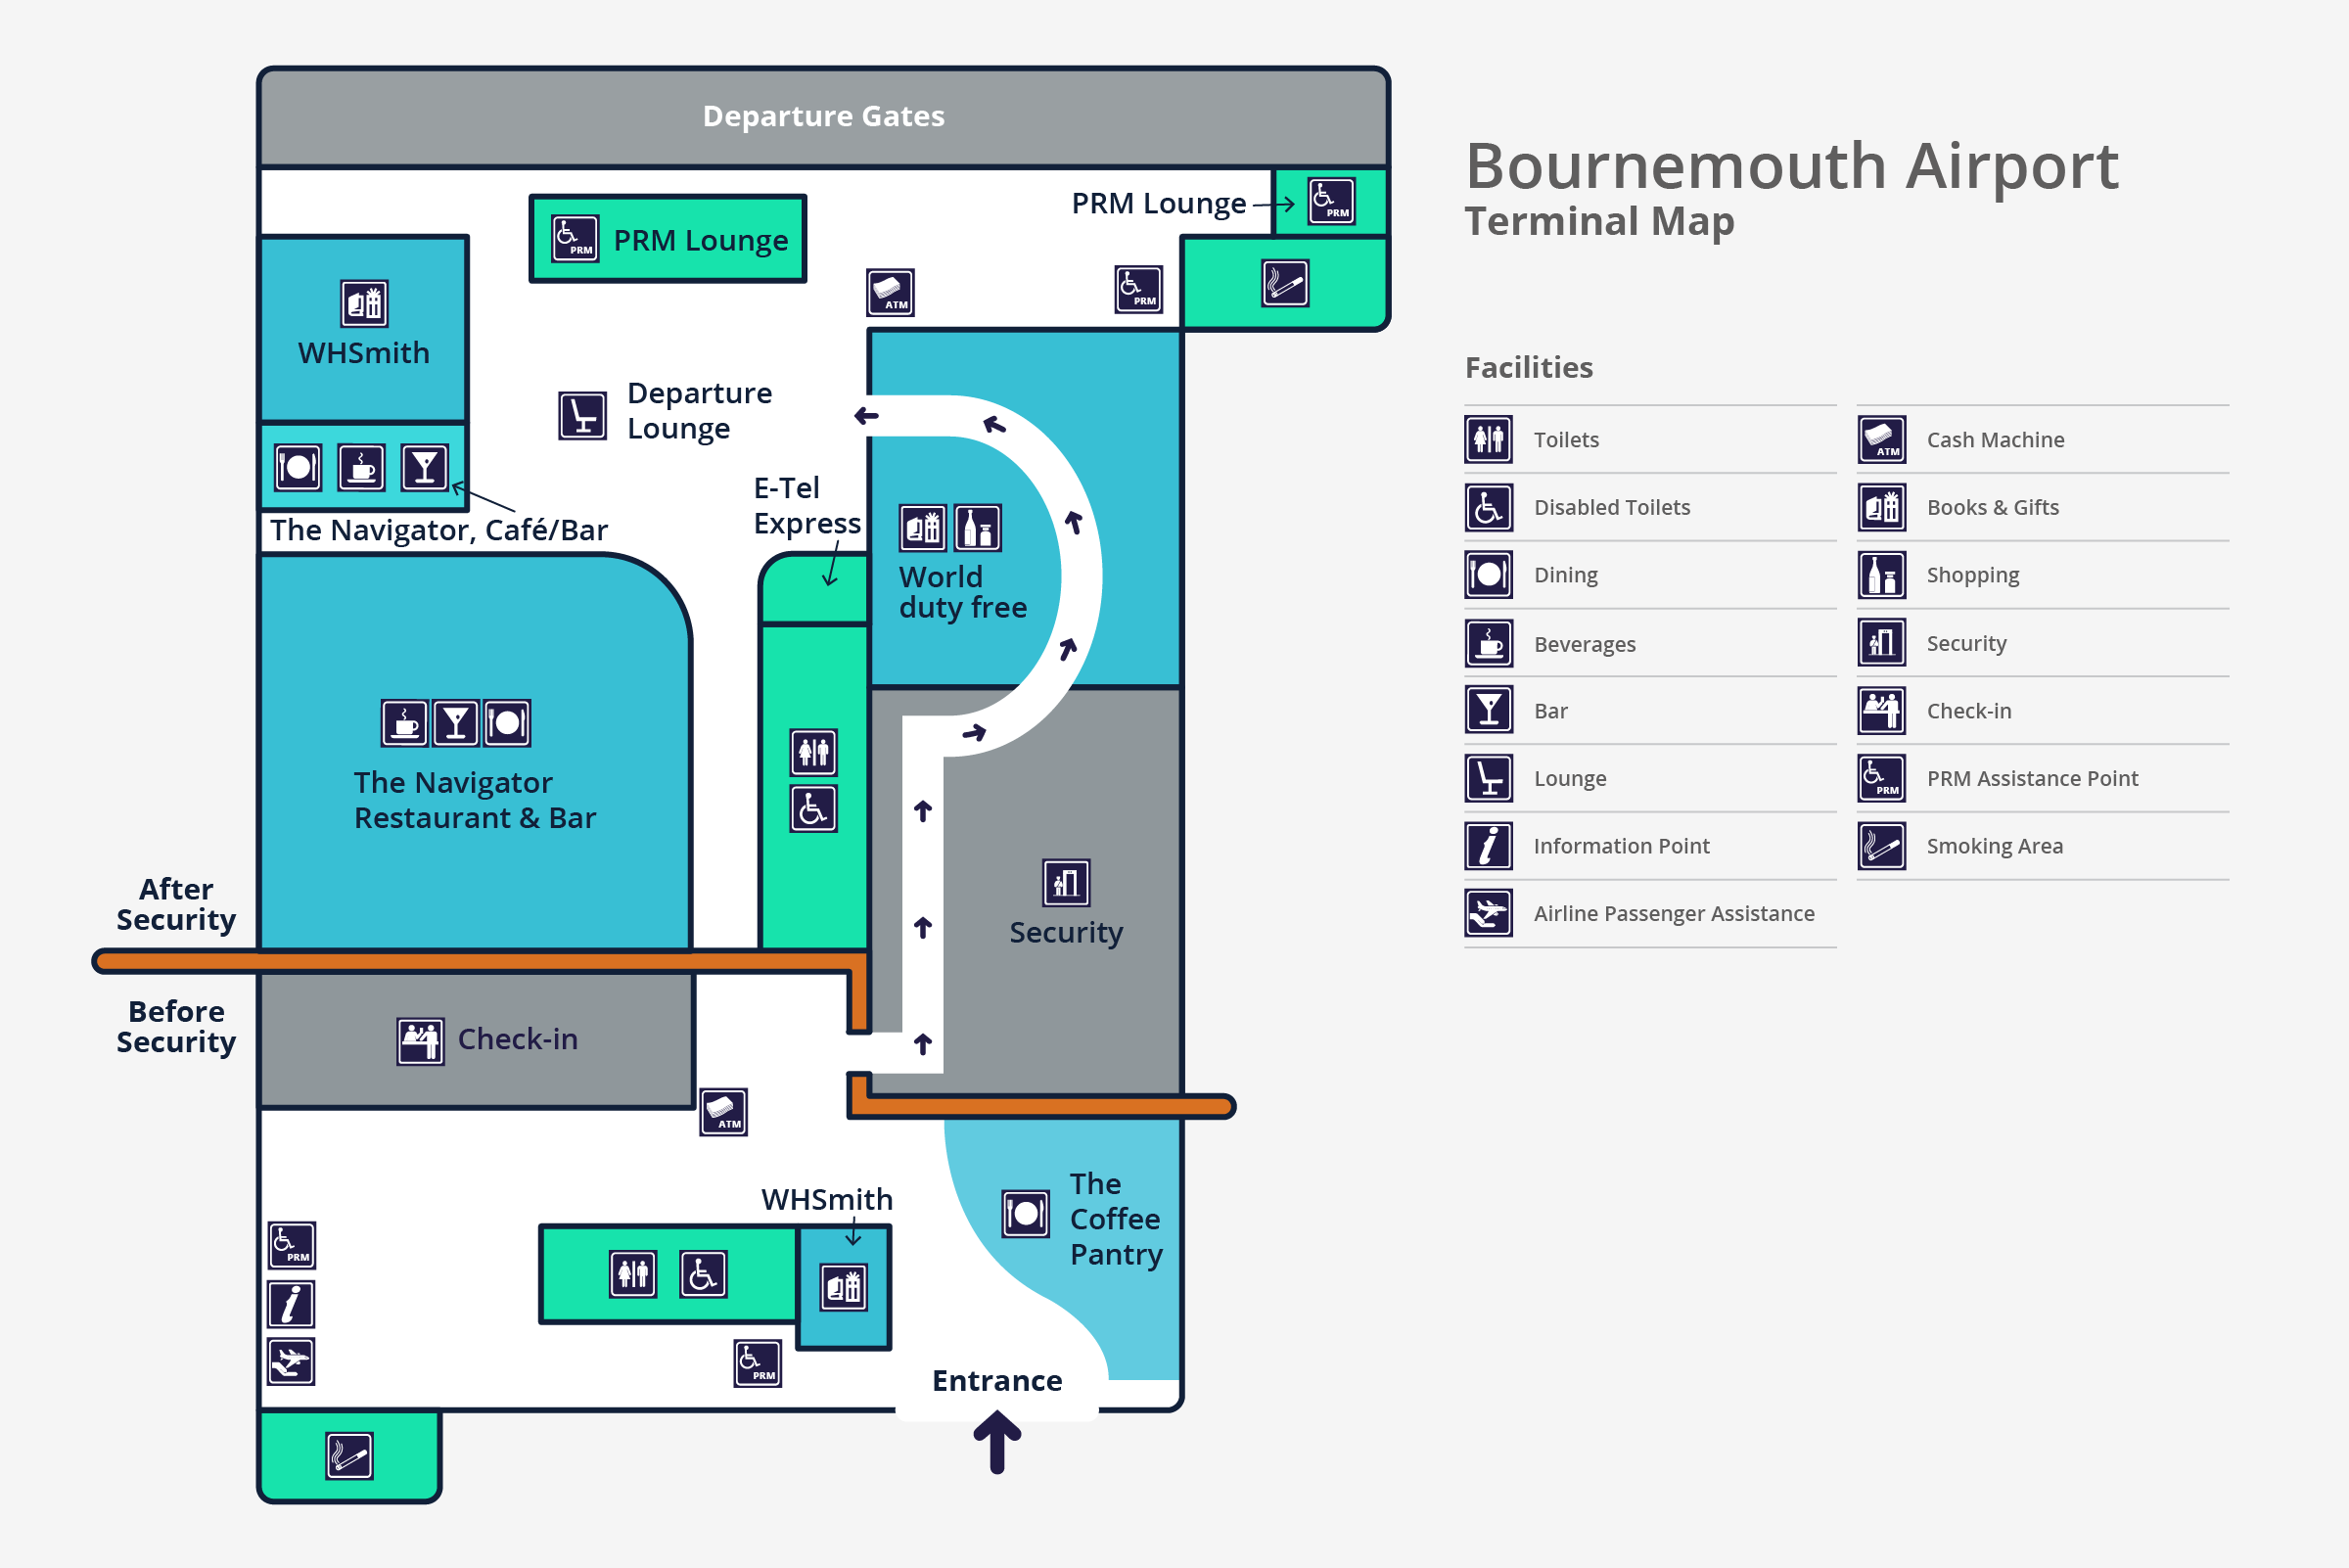 Bournemouth Airport Terminal Map